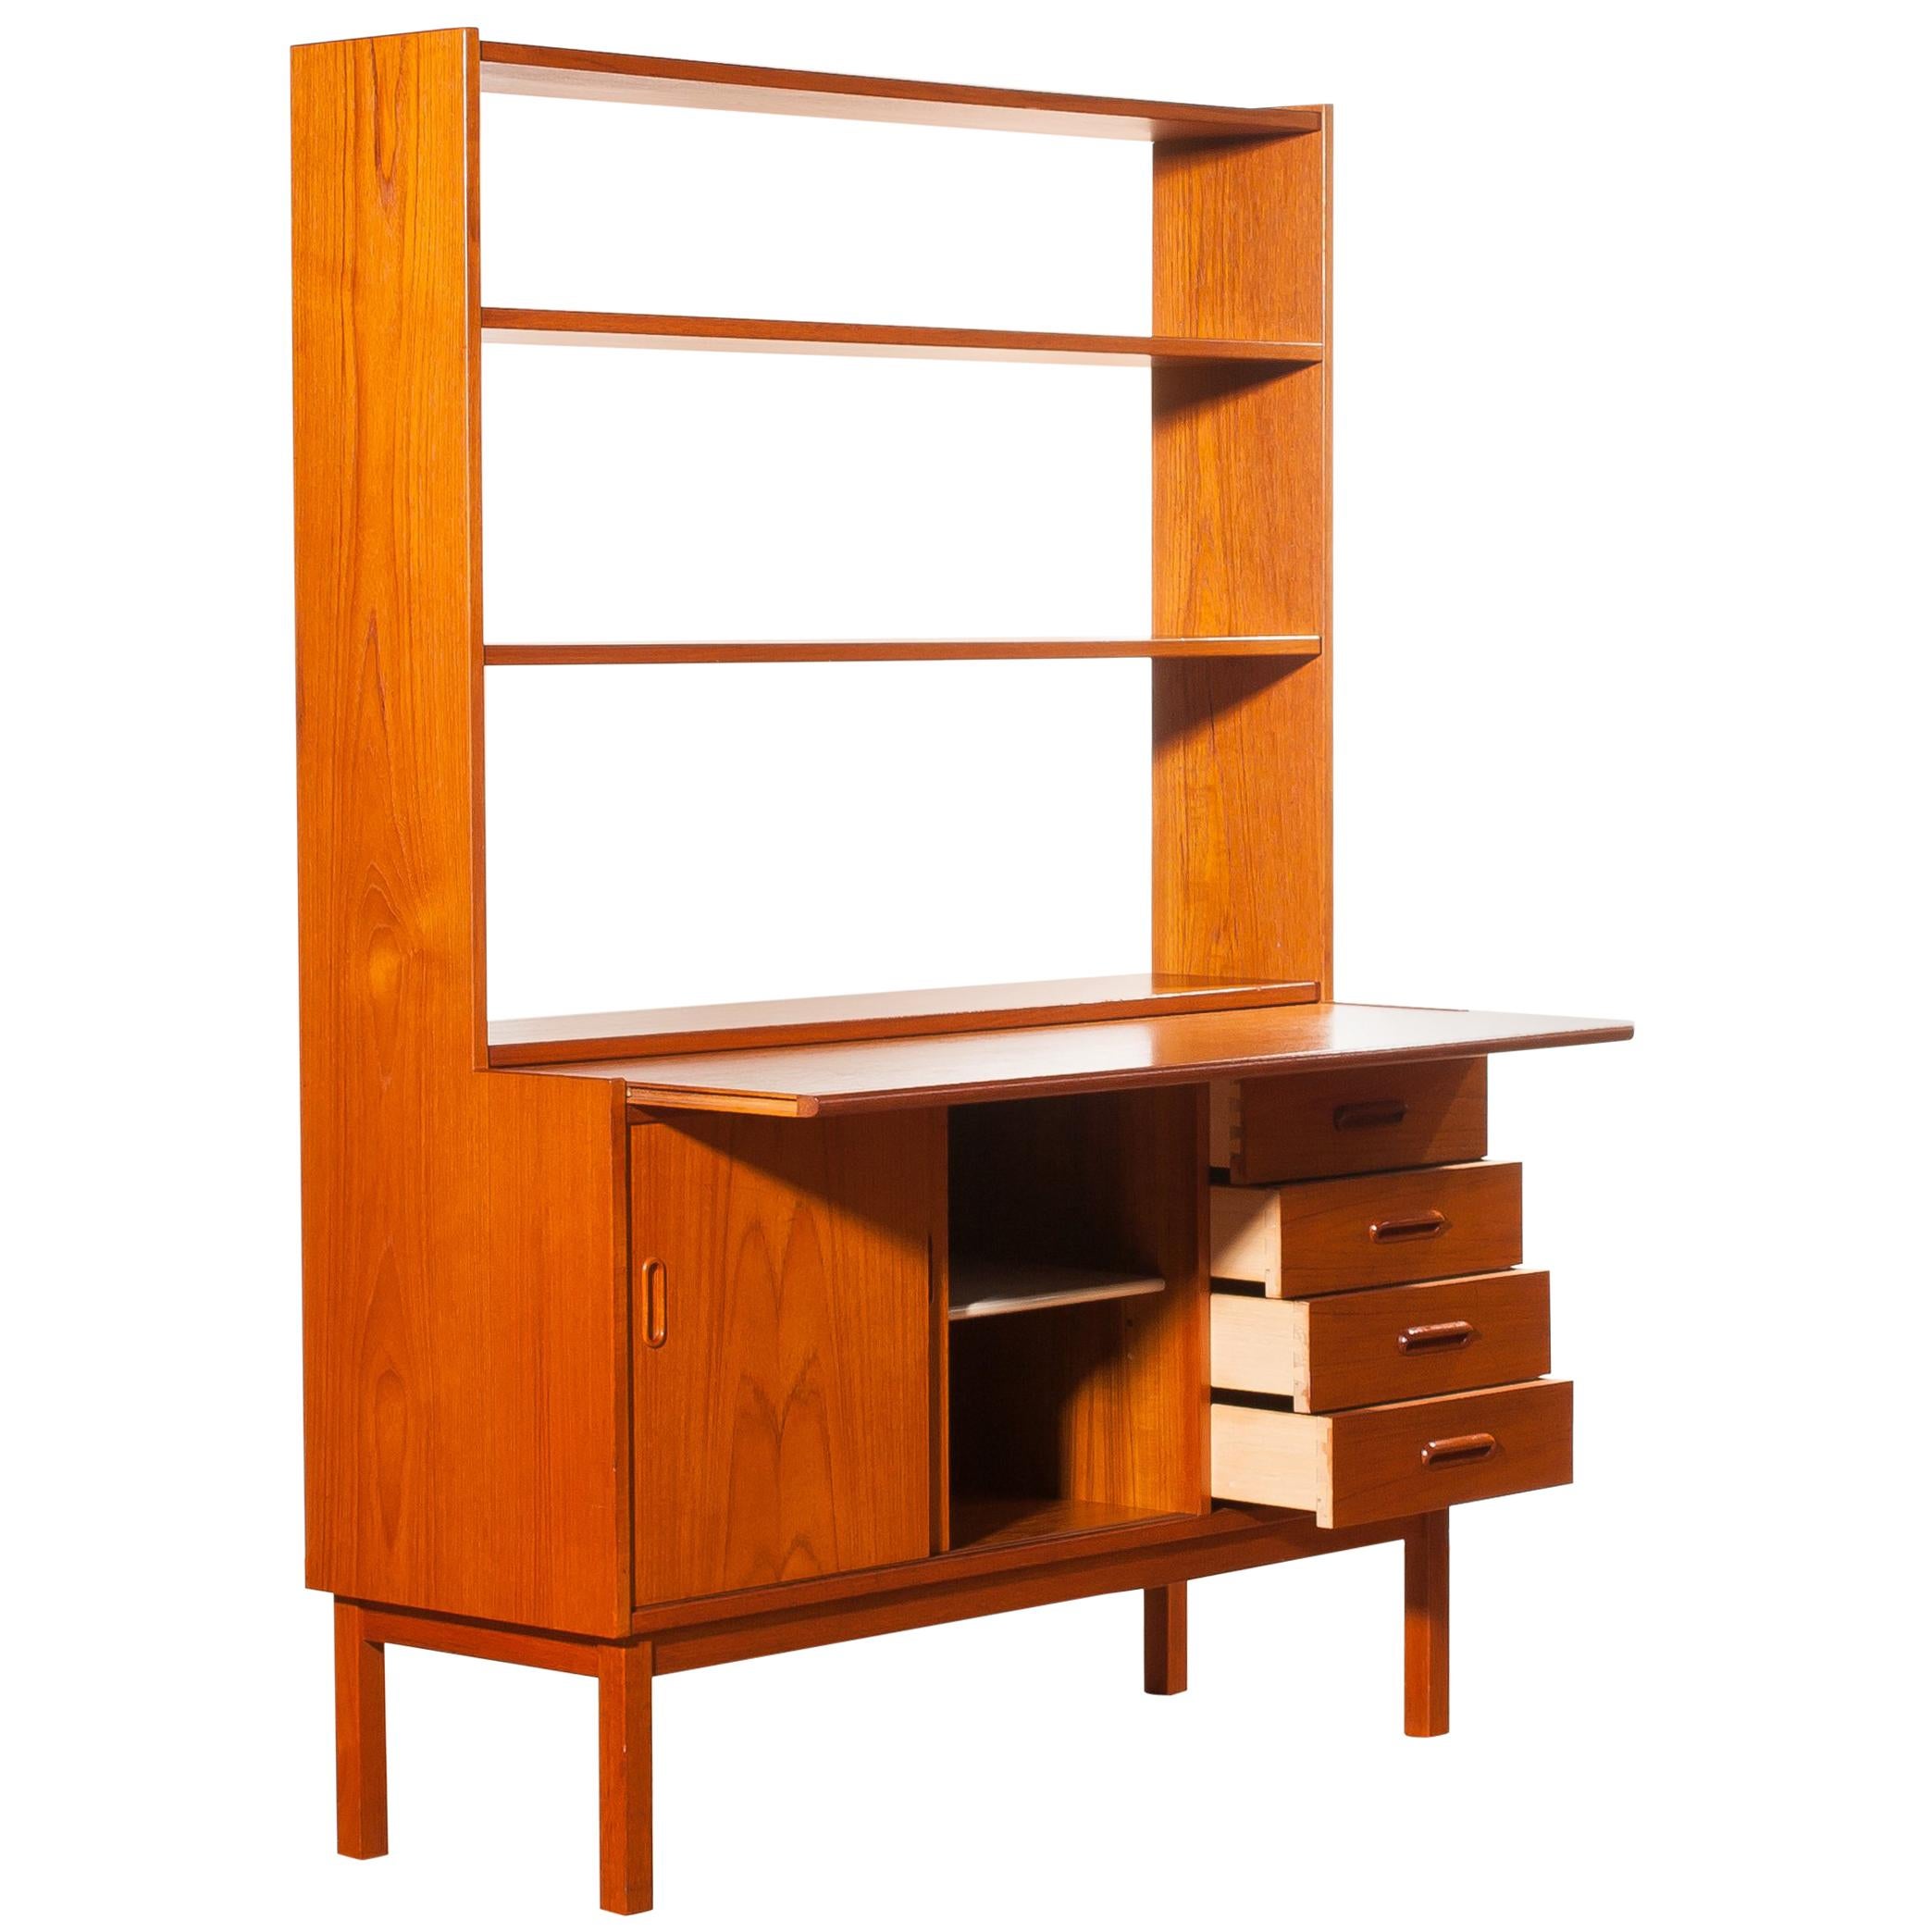 1960s, Teak Book Case with Slidable Writing or Working Space from Sweden